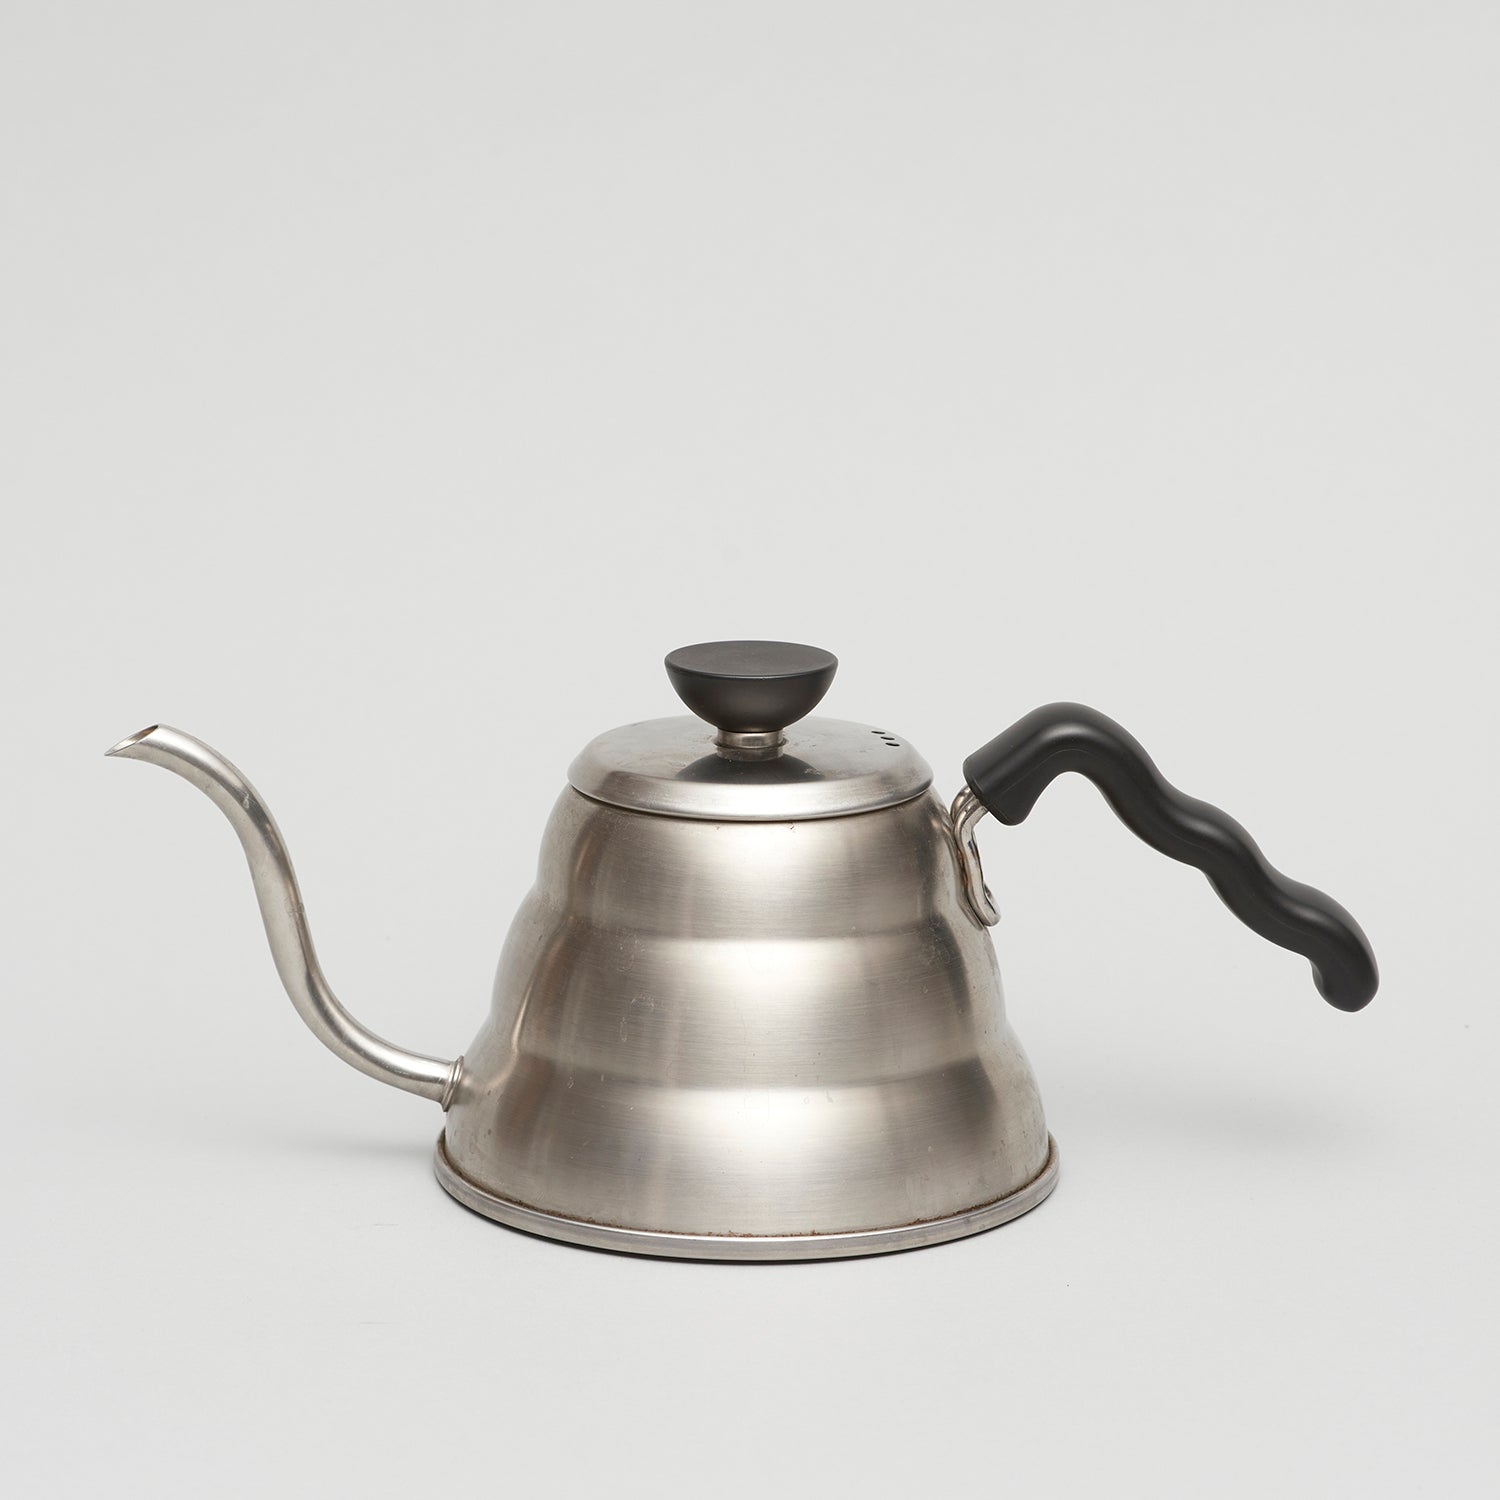 Image shows the 1 litre Bario Buono Drip Kettle, in stainless steel with a gooseneck spout.